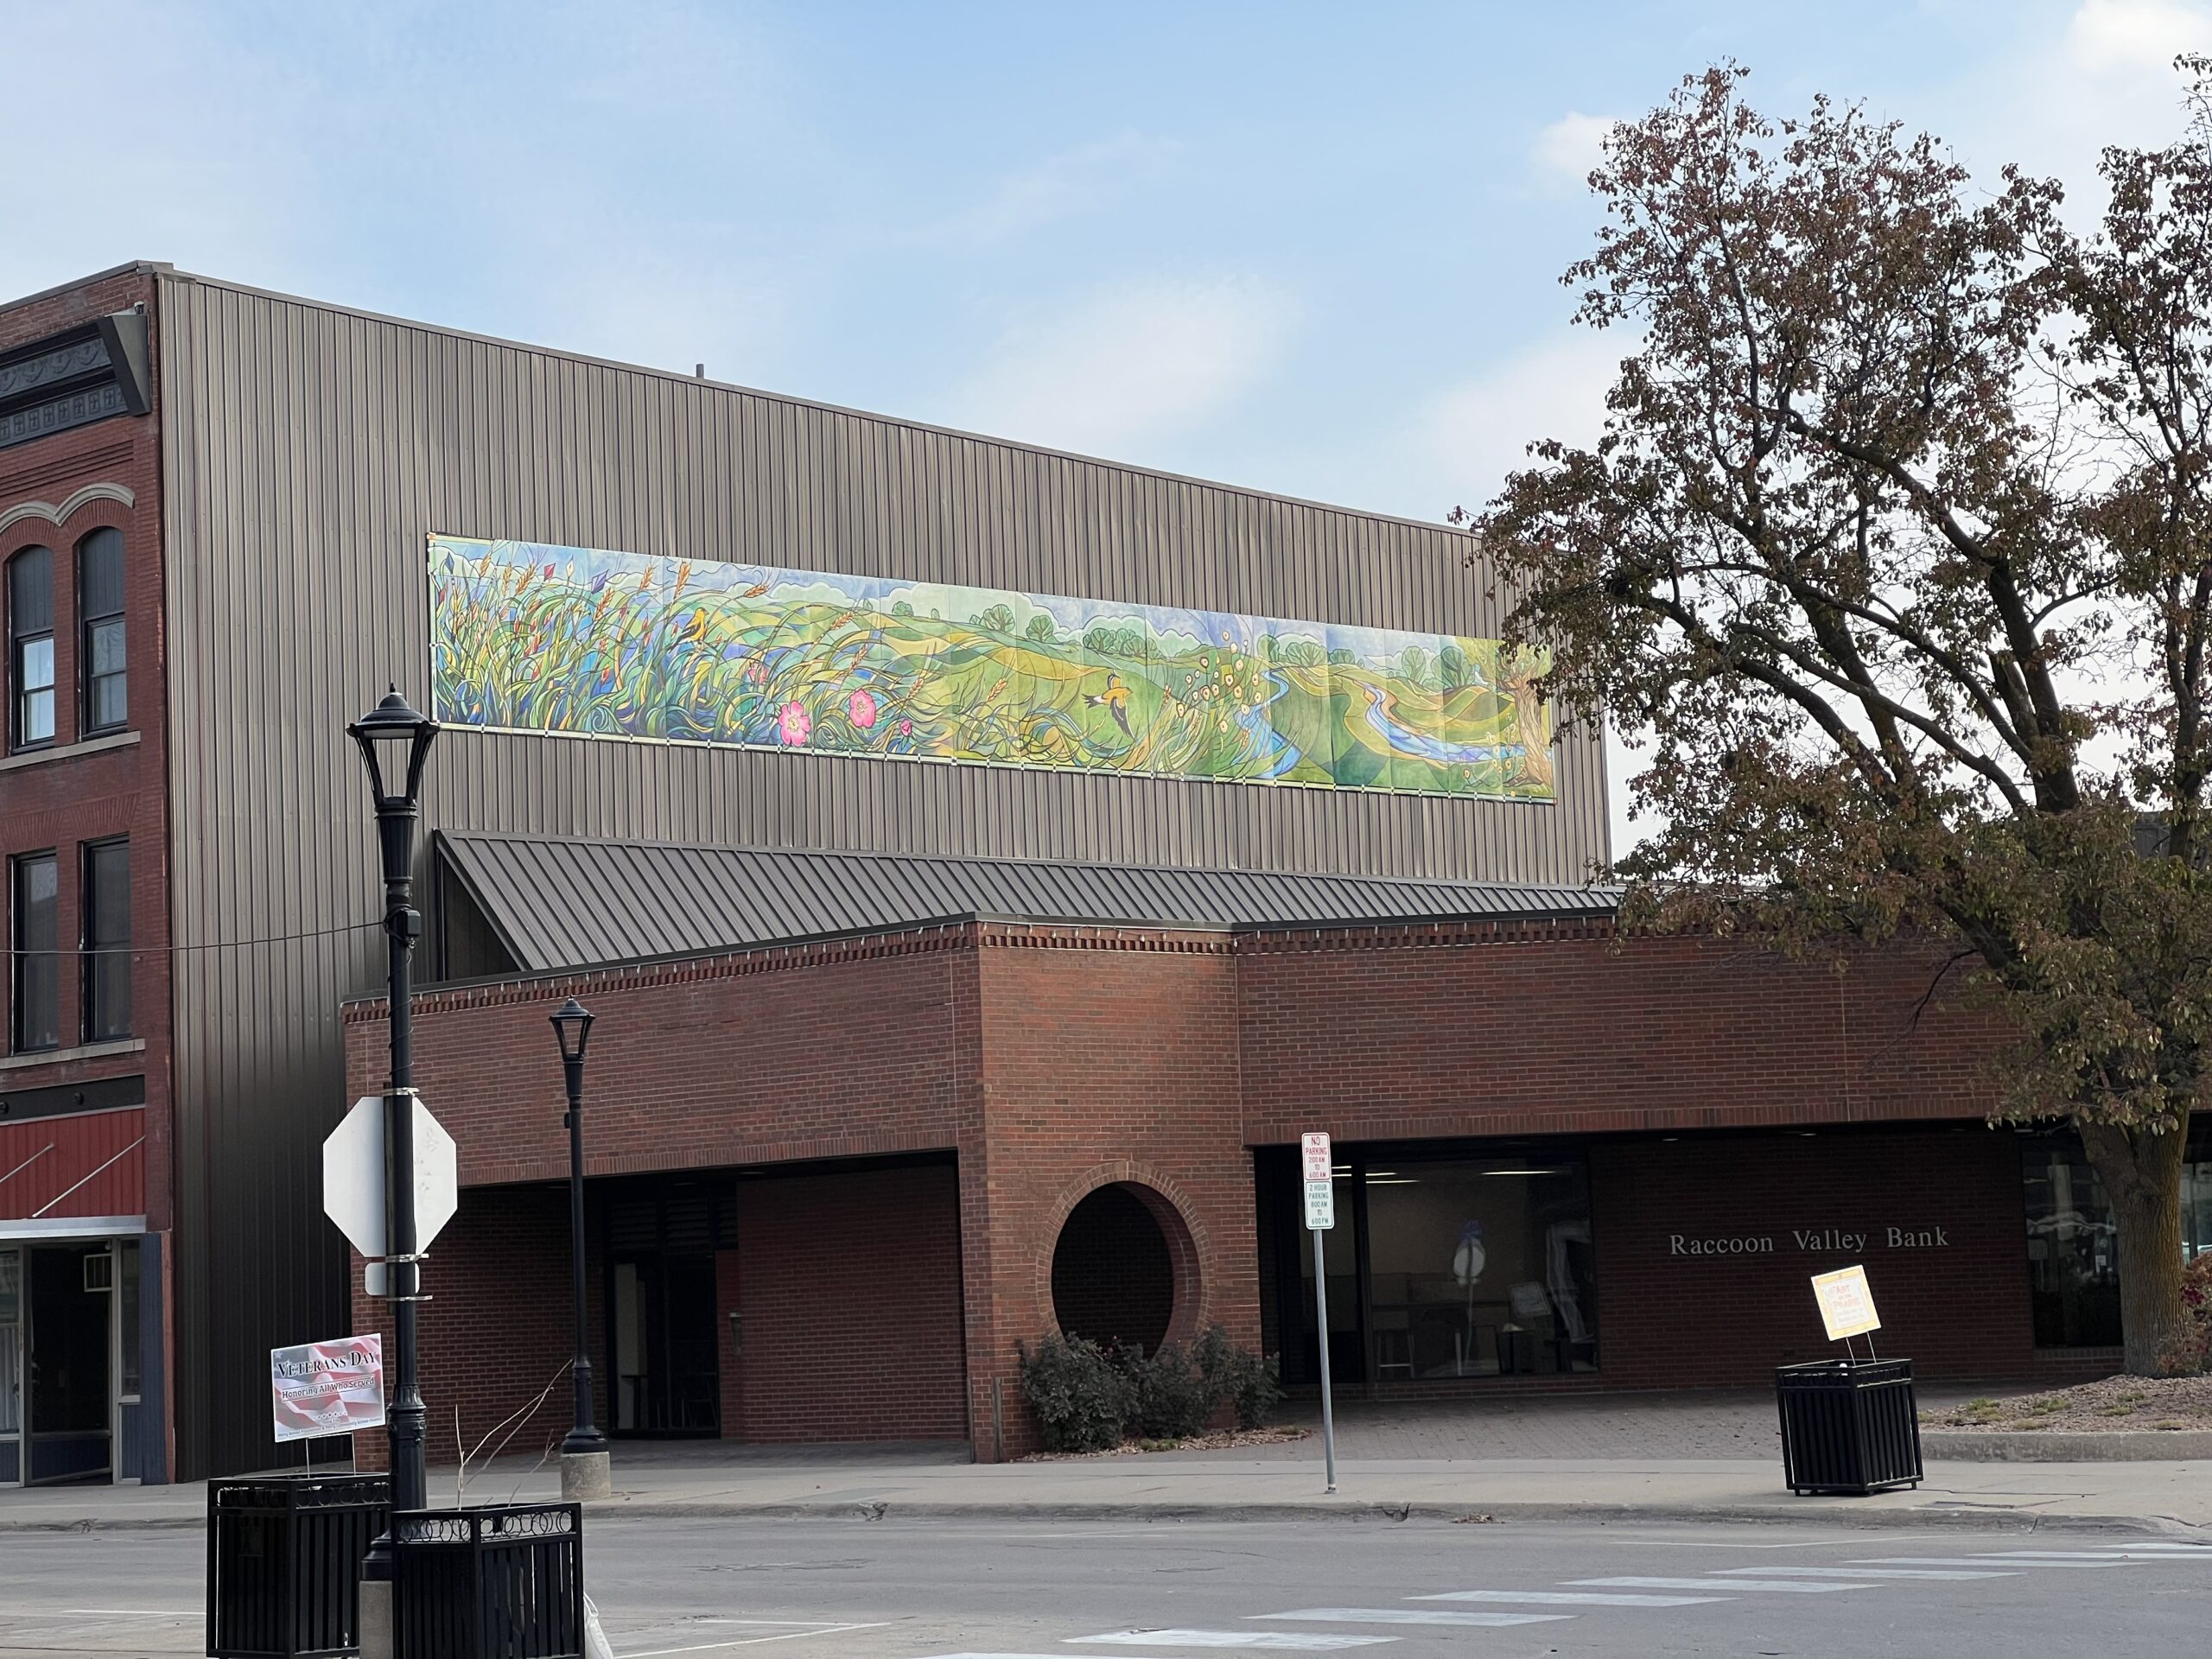 A lush green mural showing prairie life on the side of a mainstreet brick building